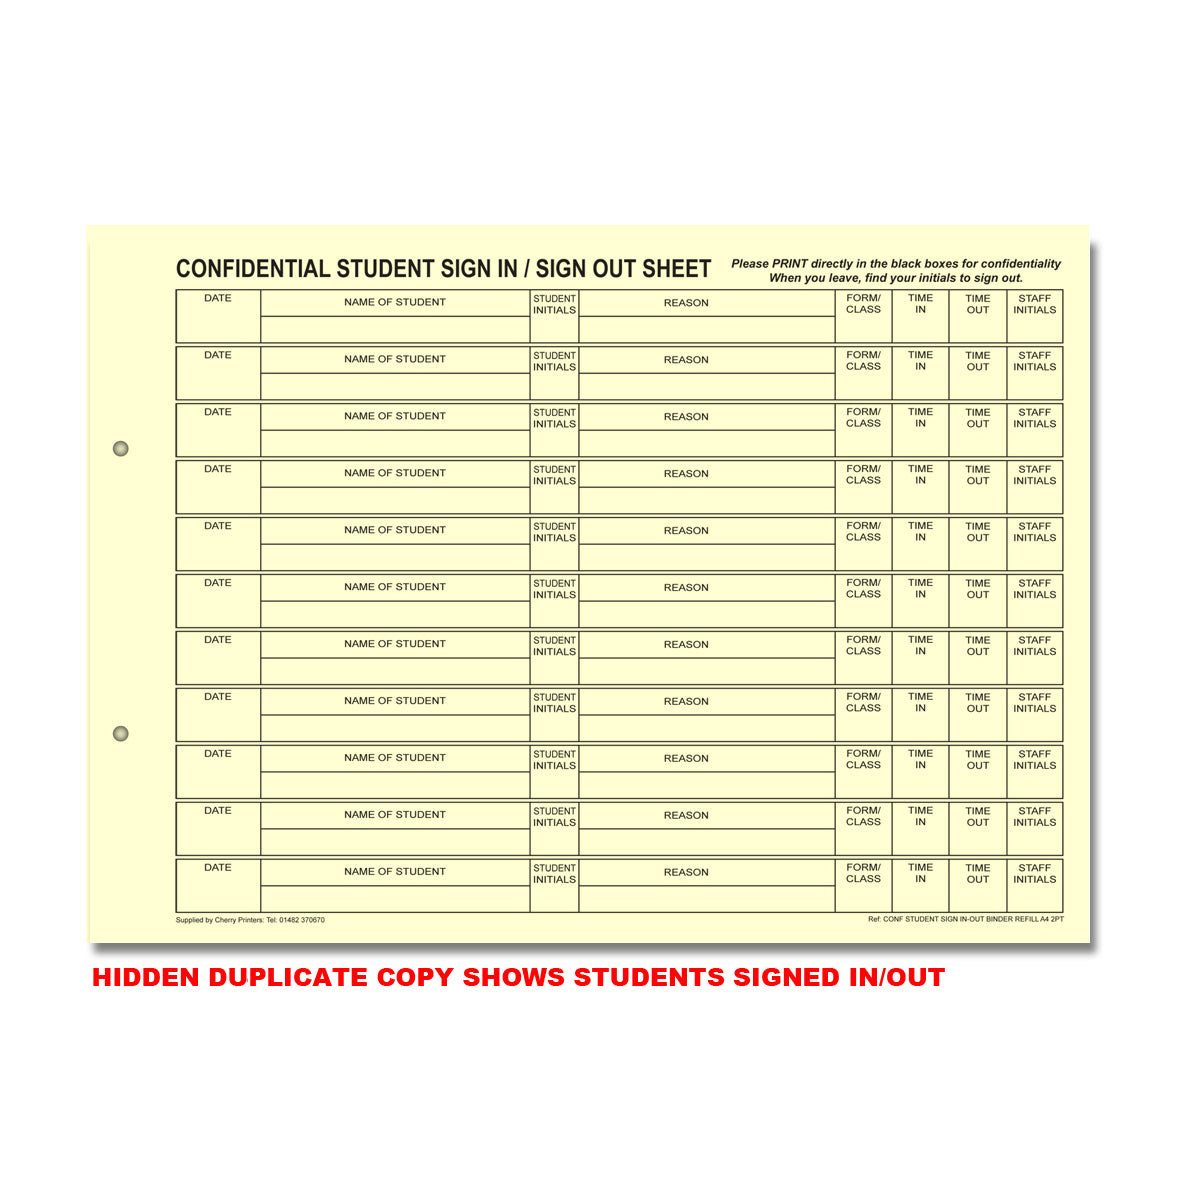 NCR Confidential Student Sign In / Out Ring Binder with 50 A4 Duplicate Sets